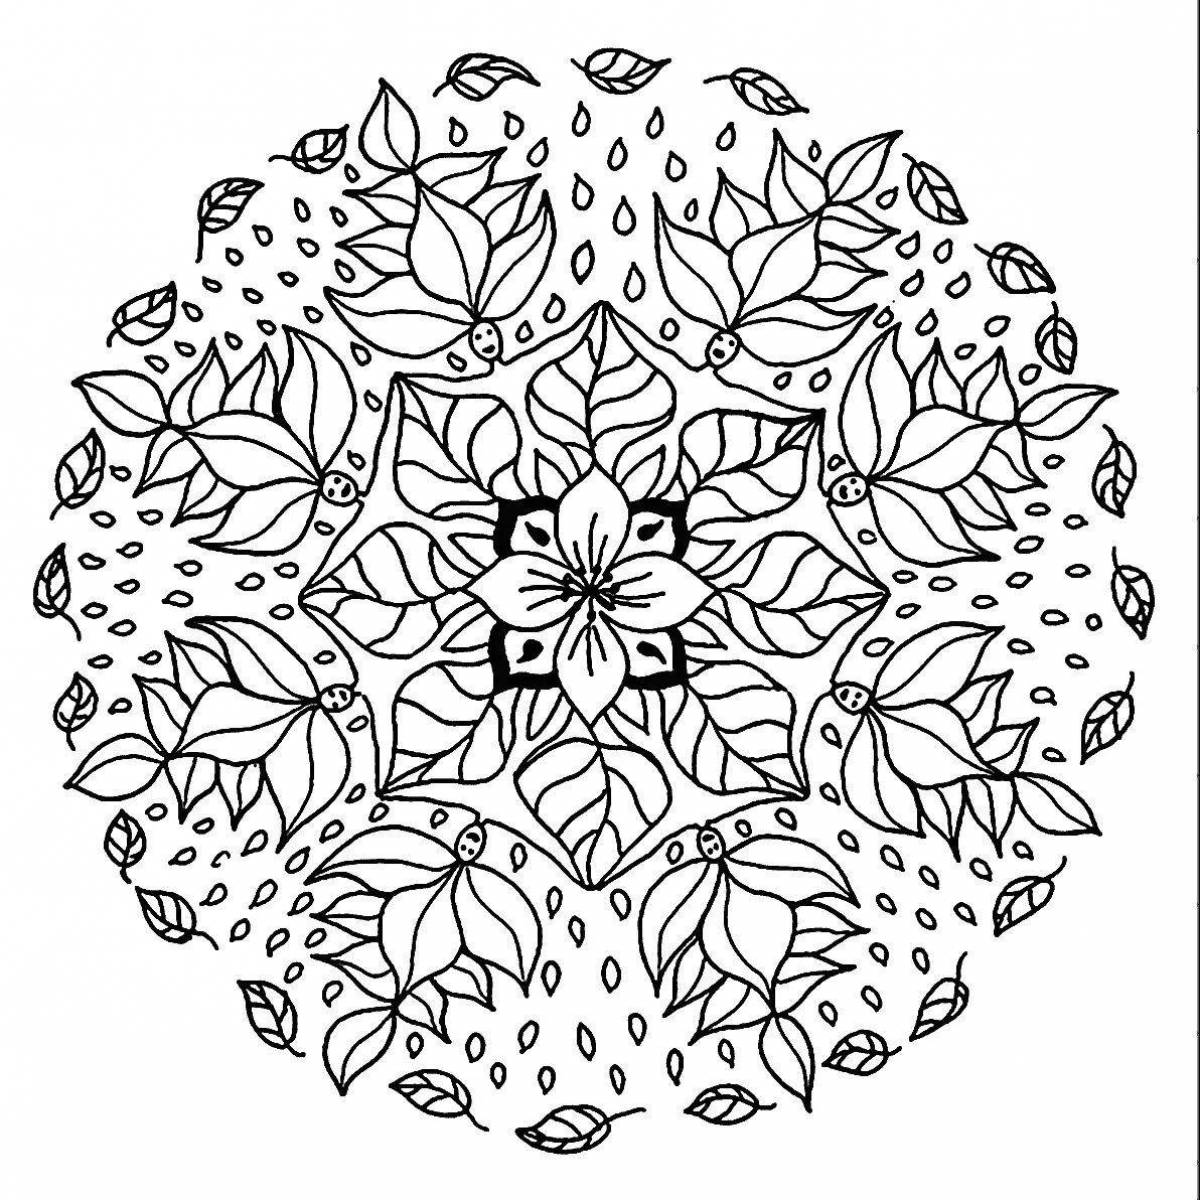 Delightful anti-stress mandala coloring pages for kids